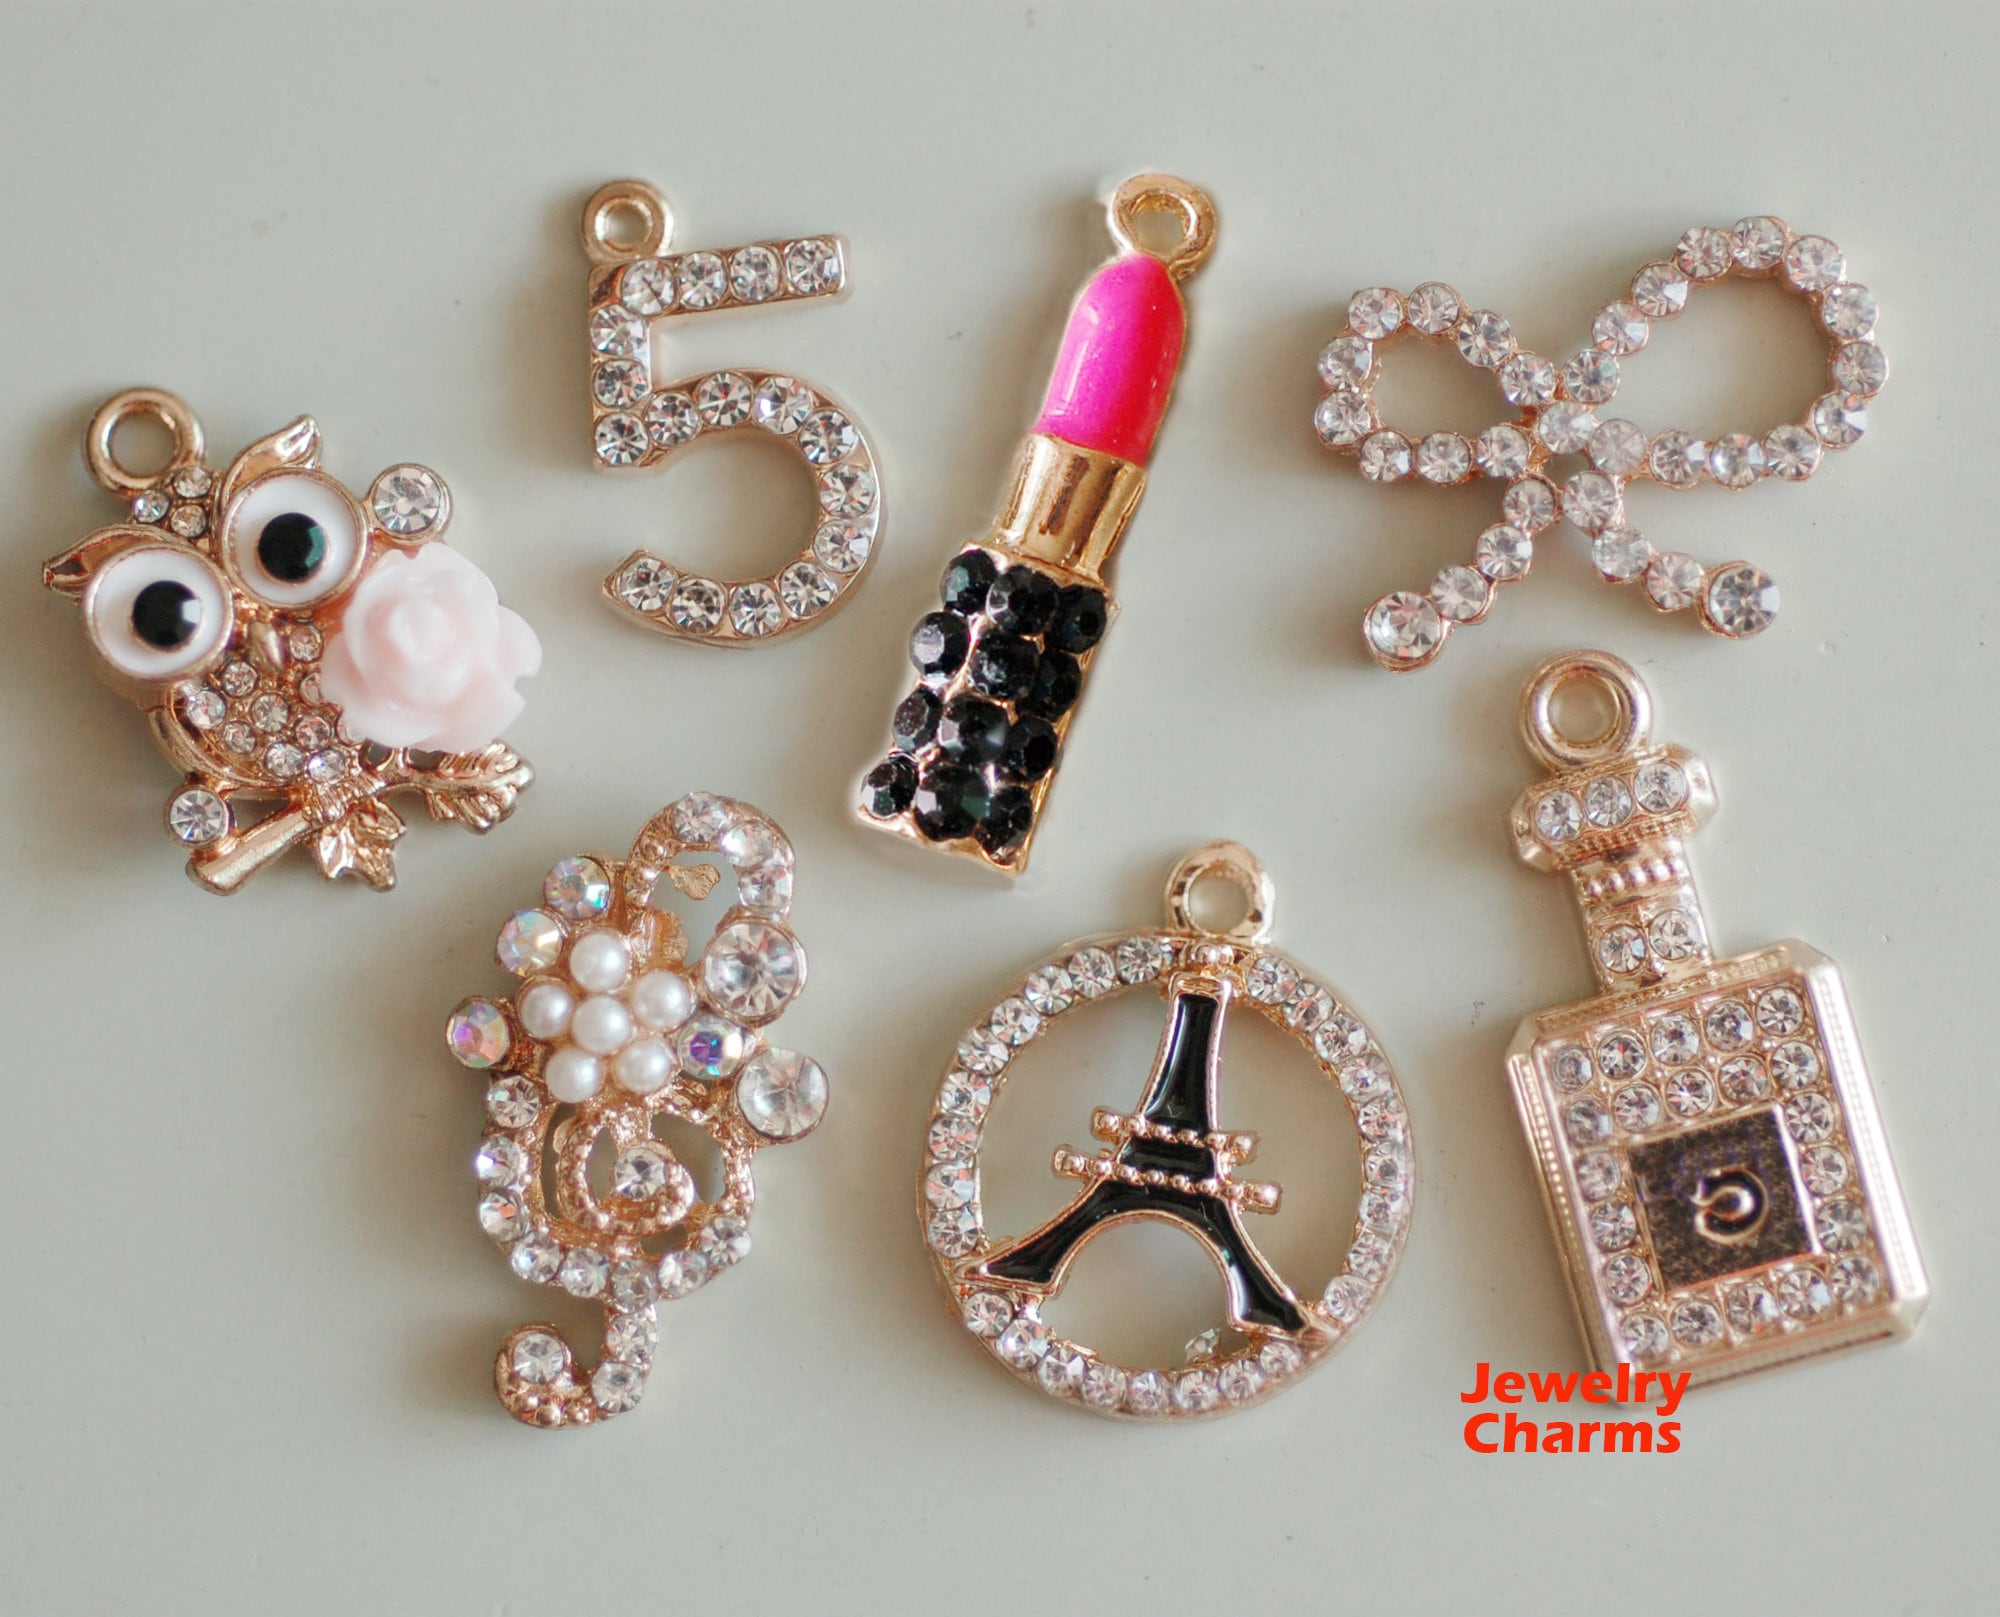 Clearance Charms Bulk Charms for Jewelry Making Charm Pack Wholesale Charms Bulk 10 Ounces Wholesale Charms Hundreds of Charms